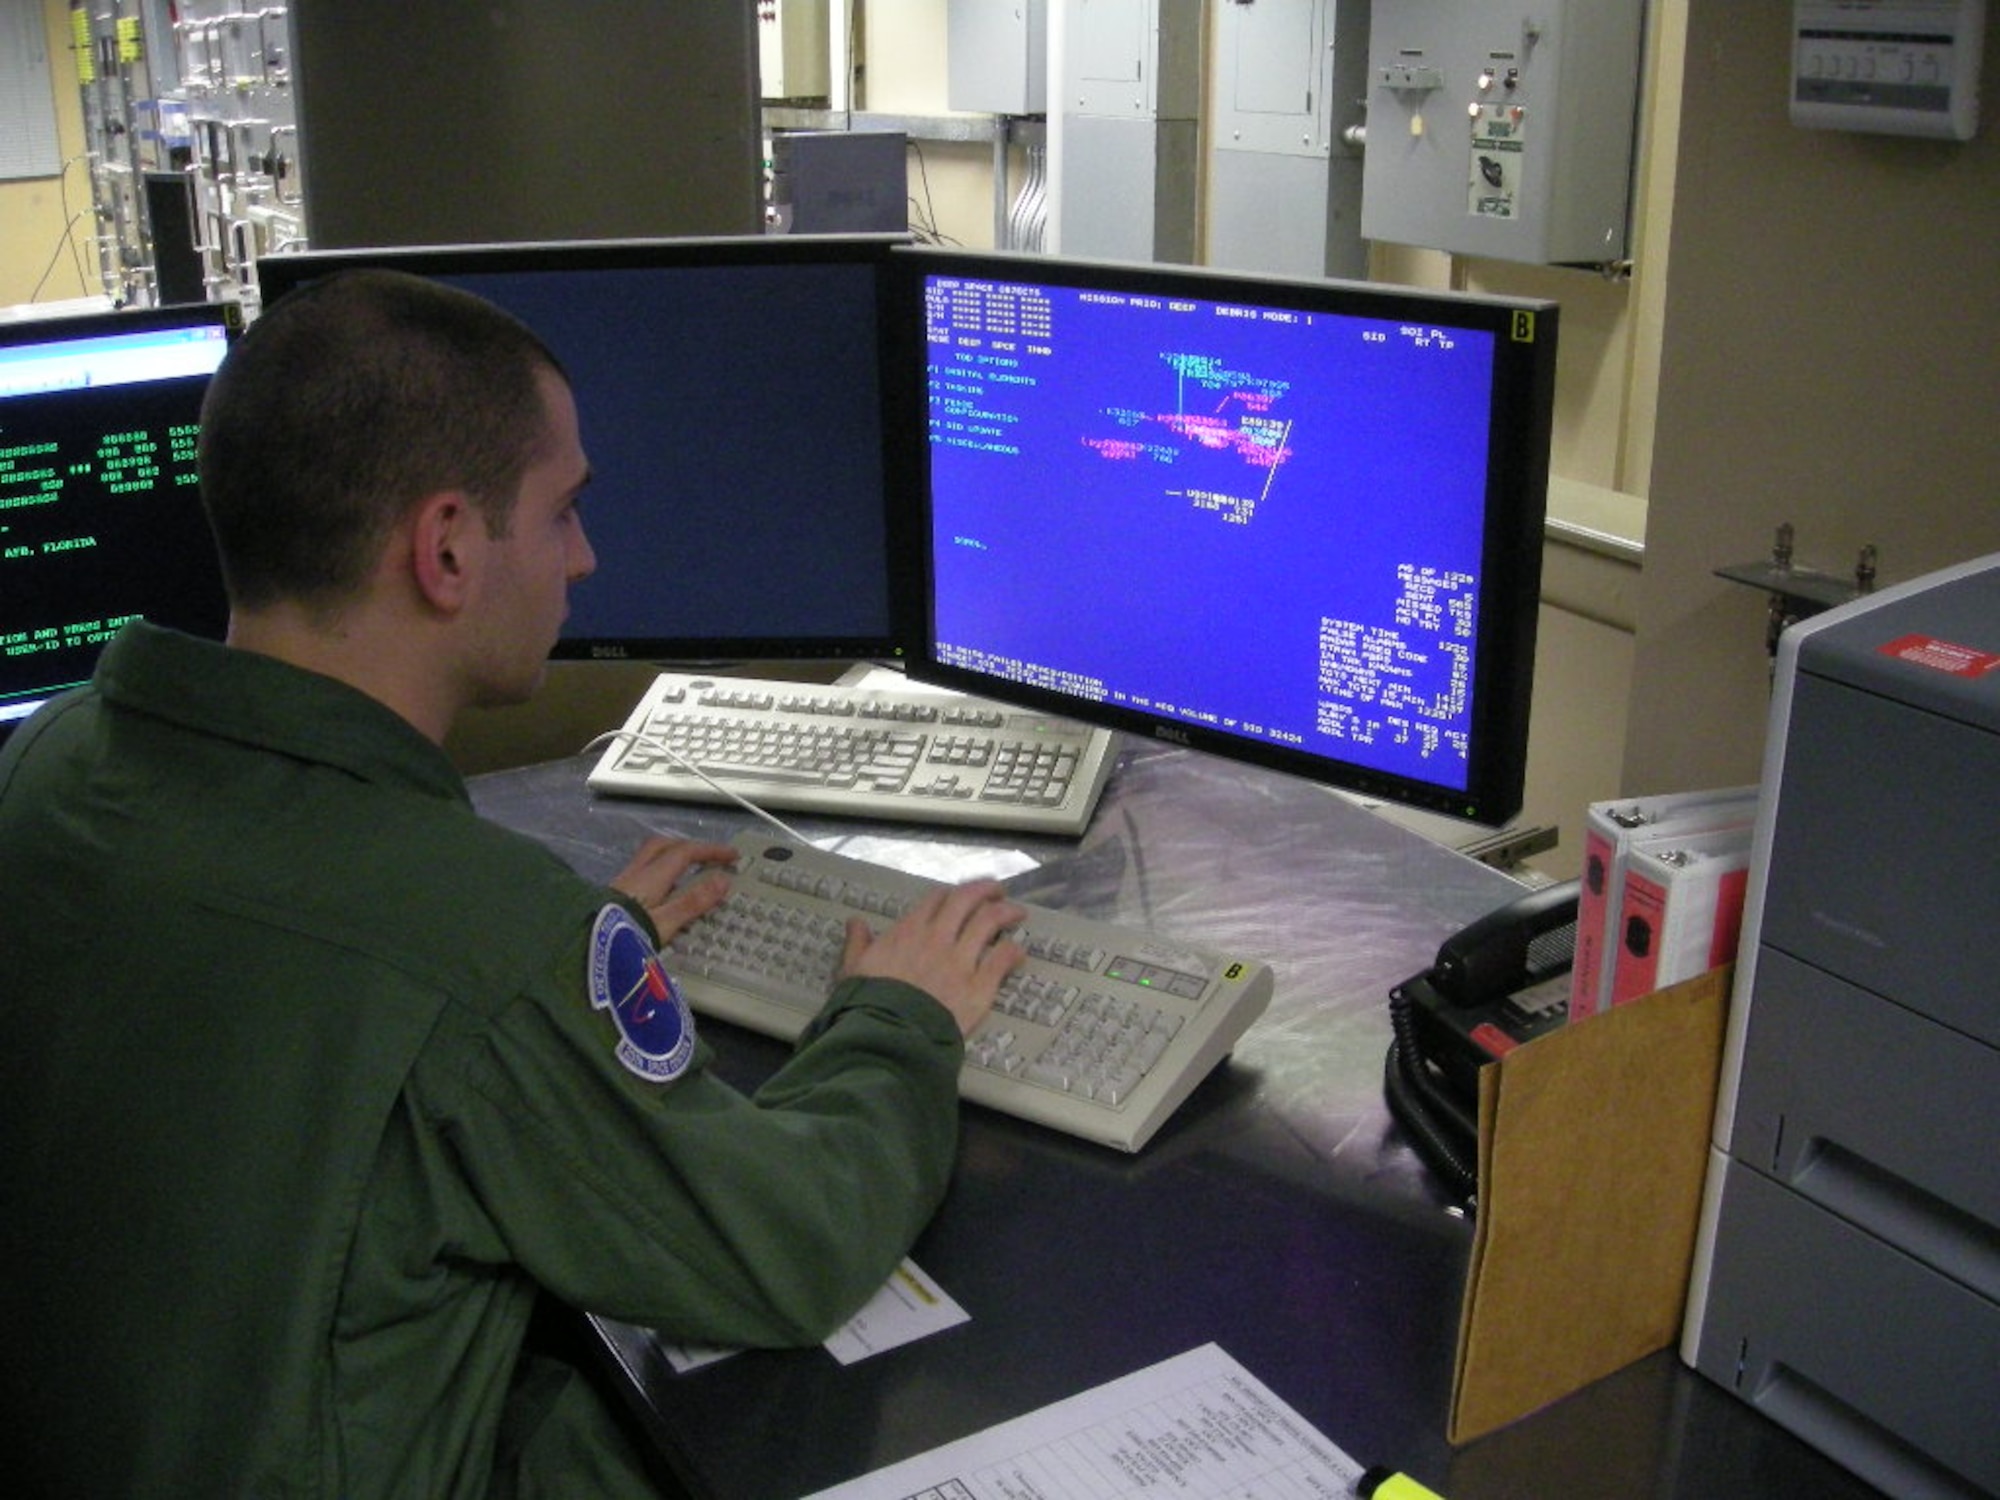 A 20th SPCS space control operator monitors information from the radar at Eglin, AFB recently. Every number on the monitor represents an object the radar is tracking. Using different keystrokes, the space console operator can direct the radar to track what the Joint Space Operations Center needs to maintain space situational awareness. (U.S. Air Force photo)